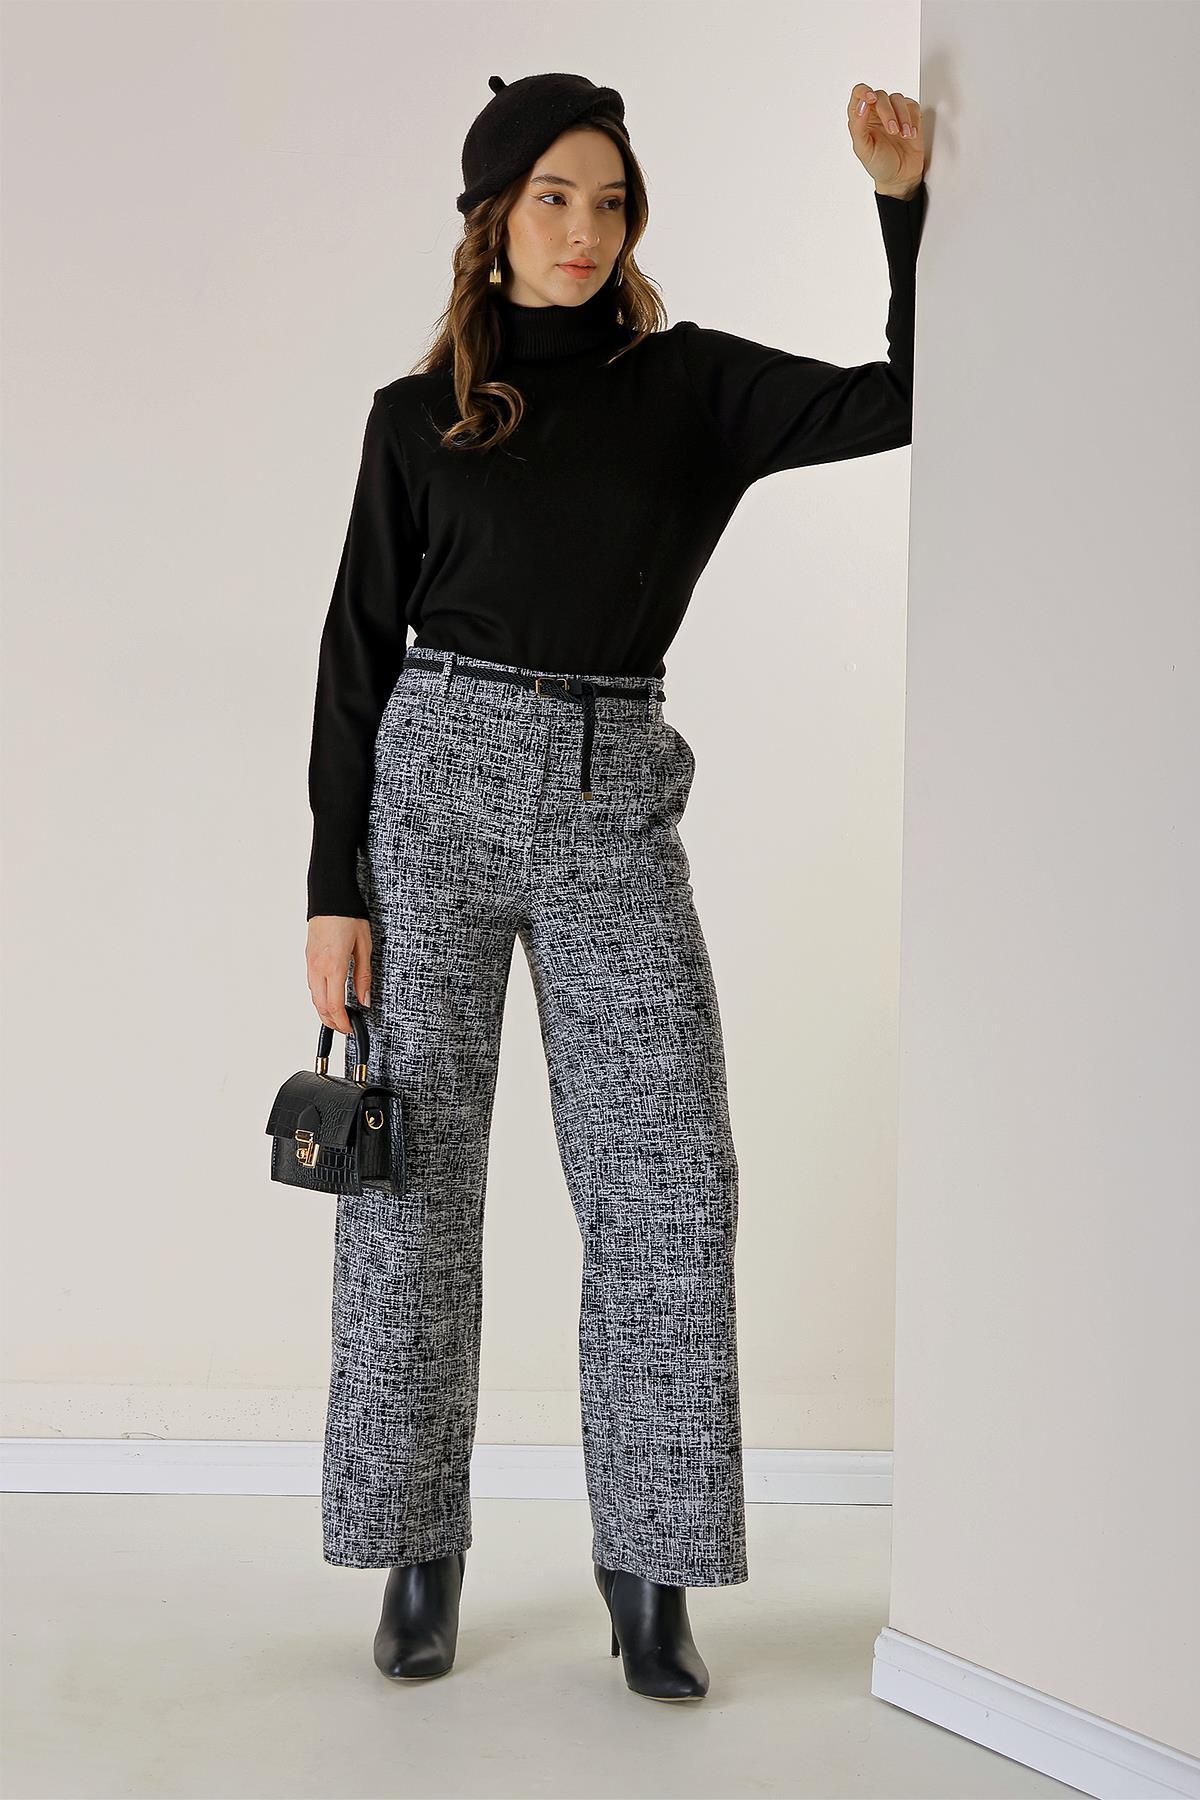 Levně By Saygı Broken Glass Patterned Palazzo Trousers with Elastic Waist Belt and Side Pockets